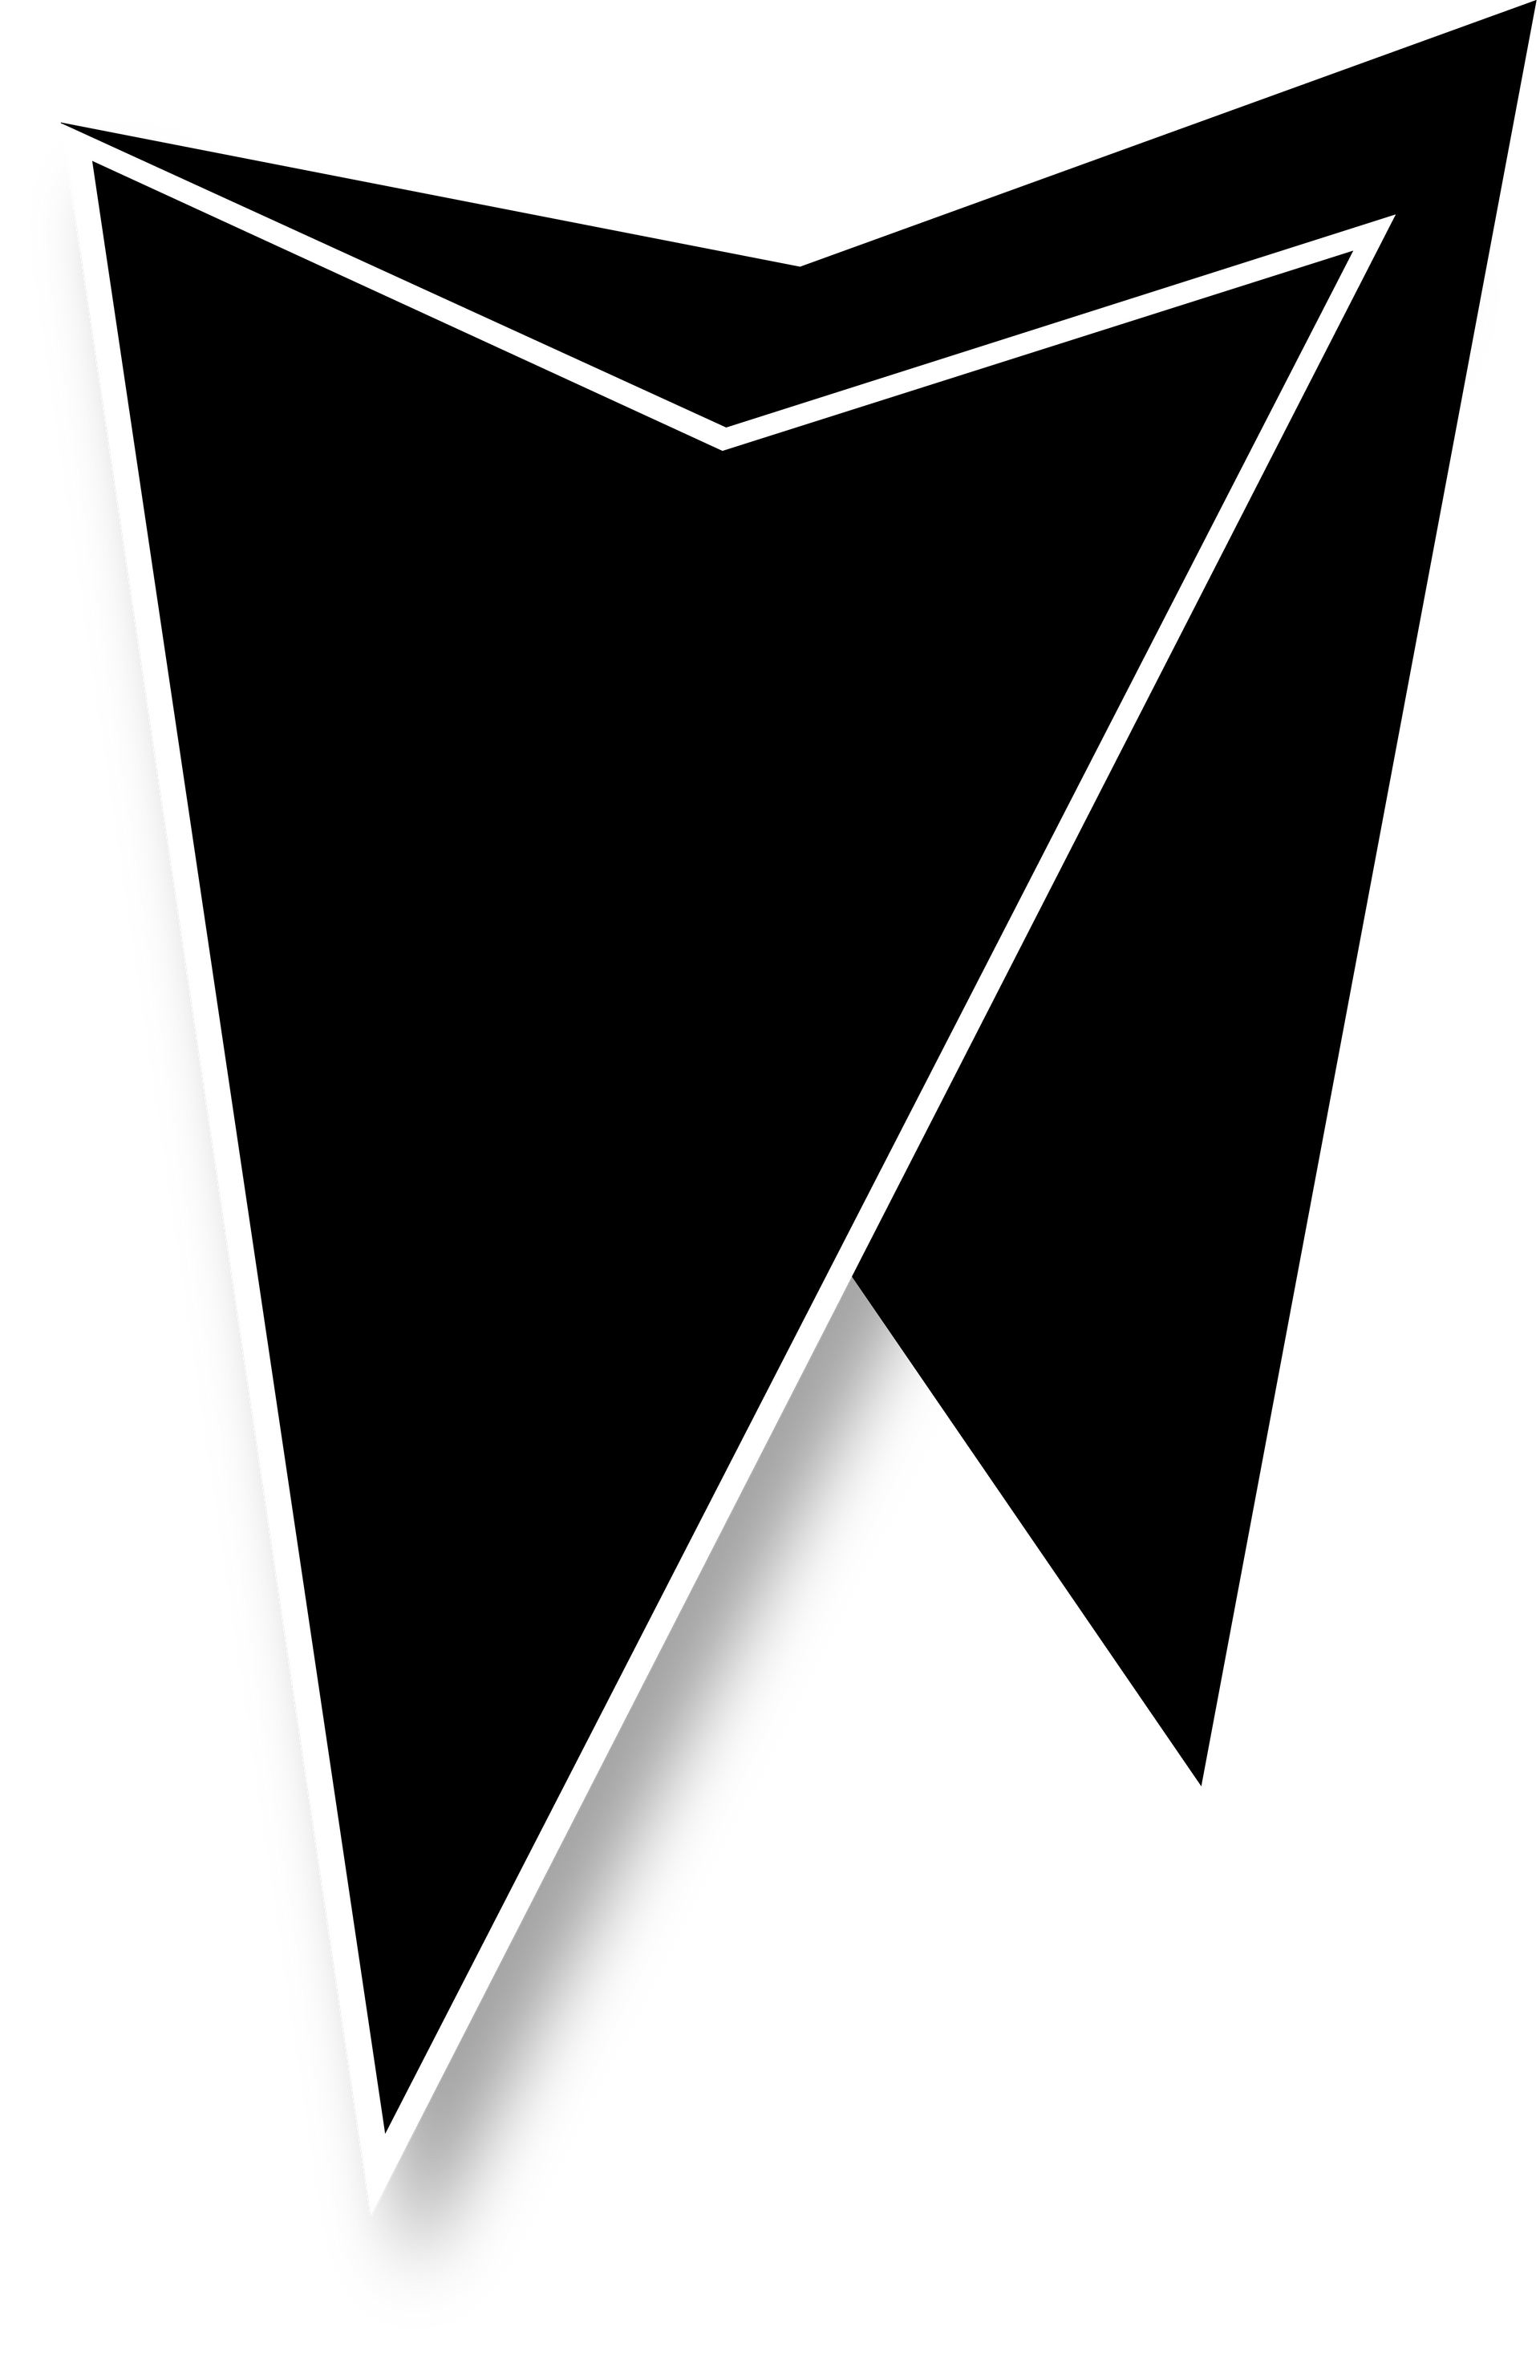 A black triangle with a white outline on a white background.